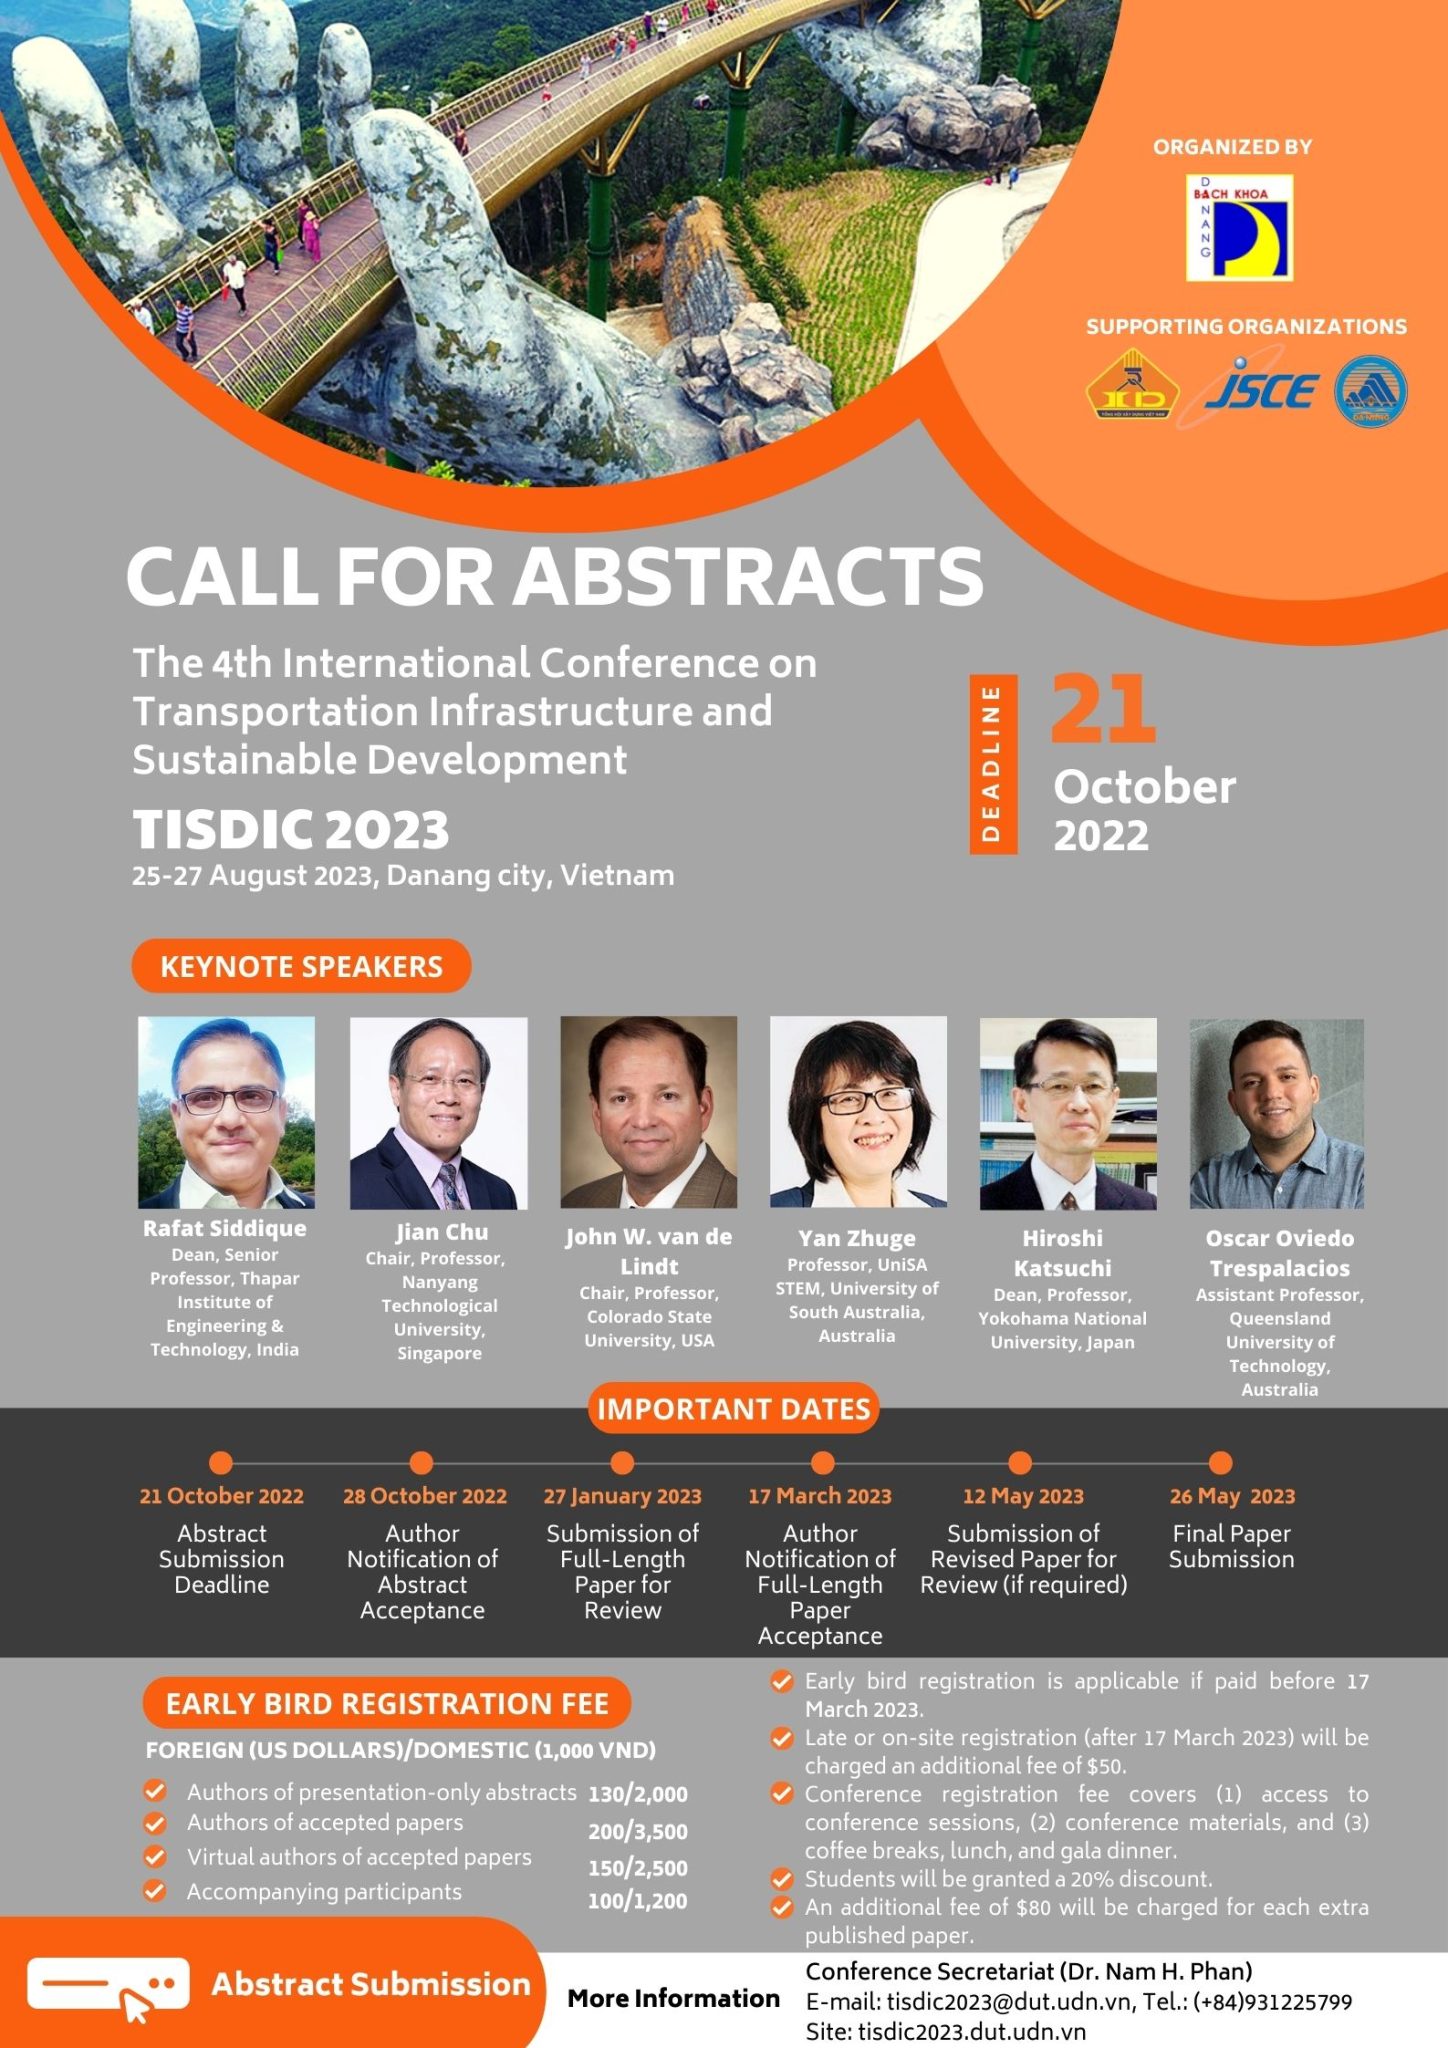 Call for Papers | The 4th International Conference on Transportation Infrastructure and Sustainable Development (TISDIC 2023)